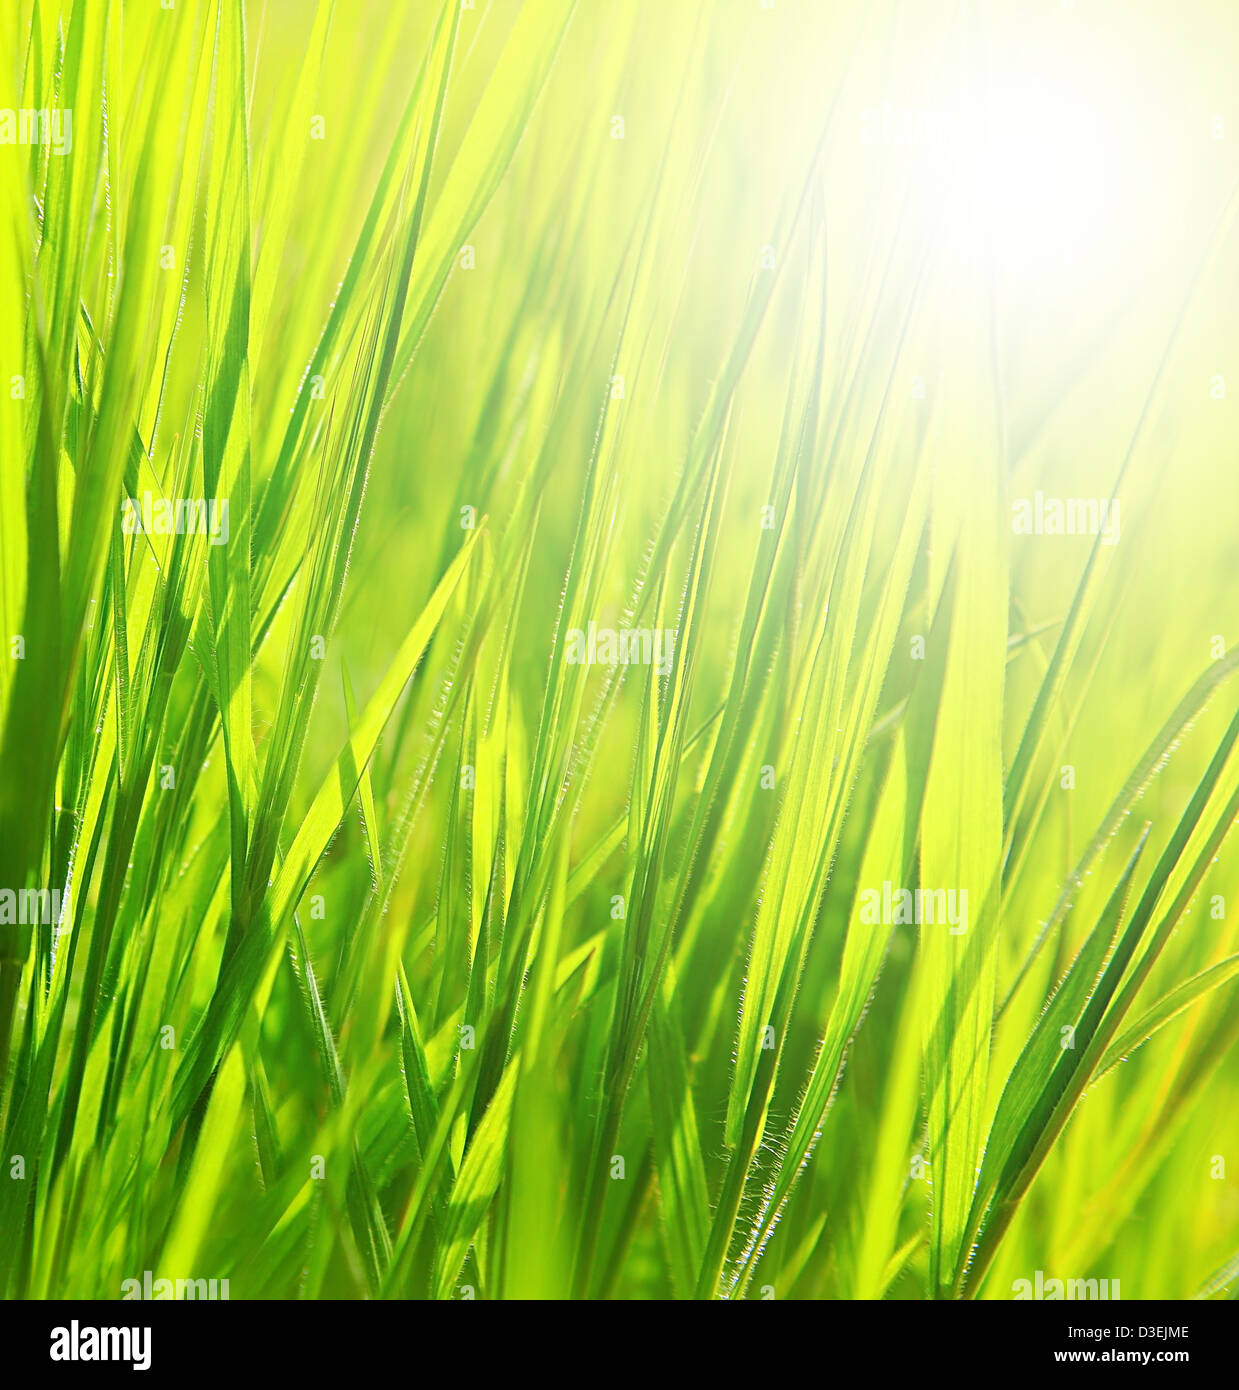 Image of fresh green grass background, spring nature, grassy border with  bright yellow sun light, abstract natural backdrop Stock Photo - Alamy